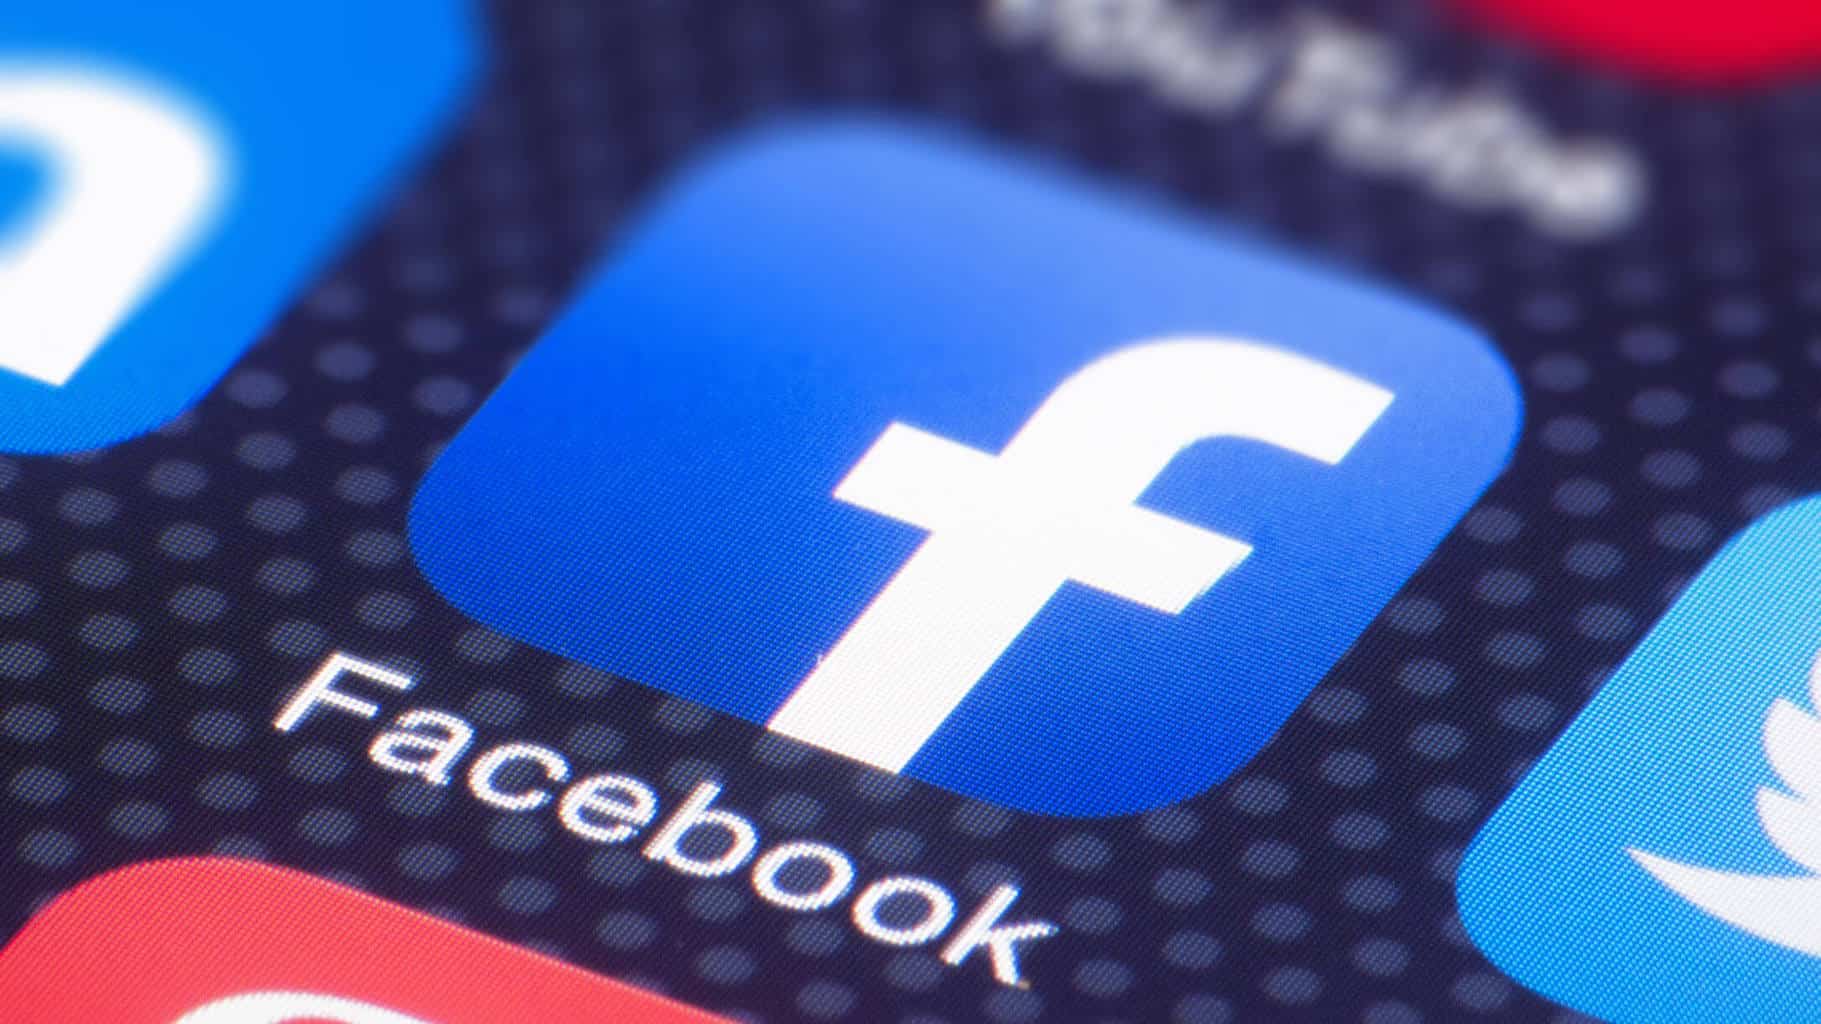 Cambridge Analytica Investigations Make Facebook (FB) Suspend Thousands of Apps